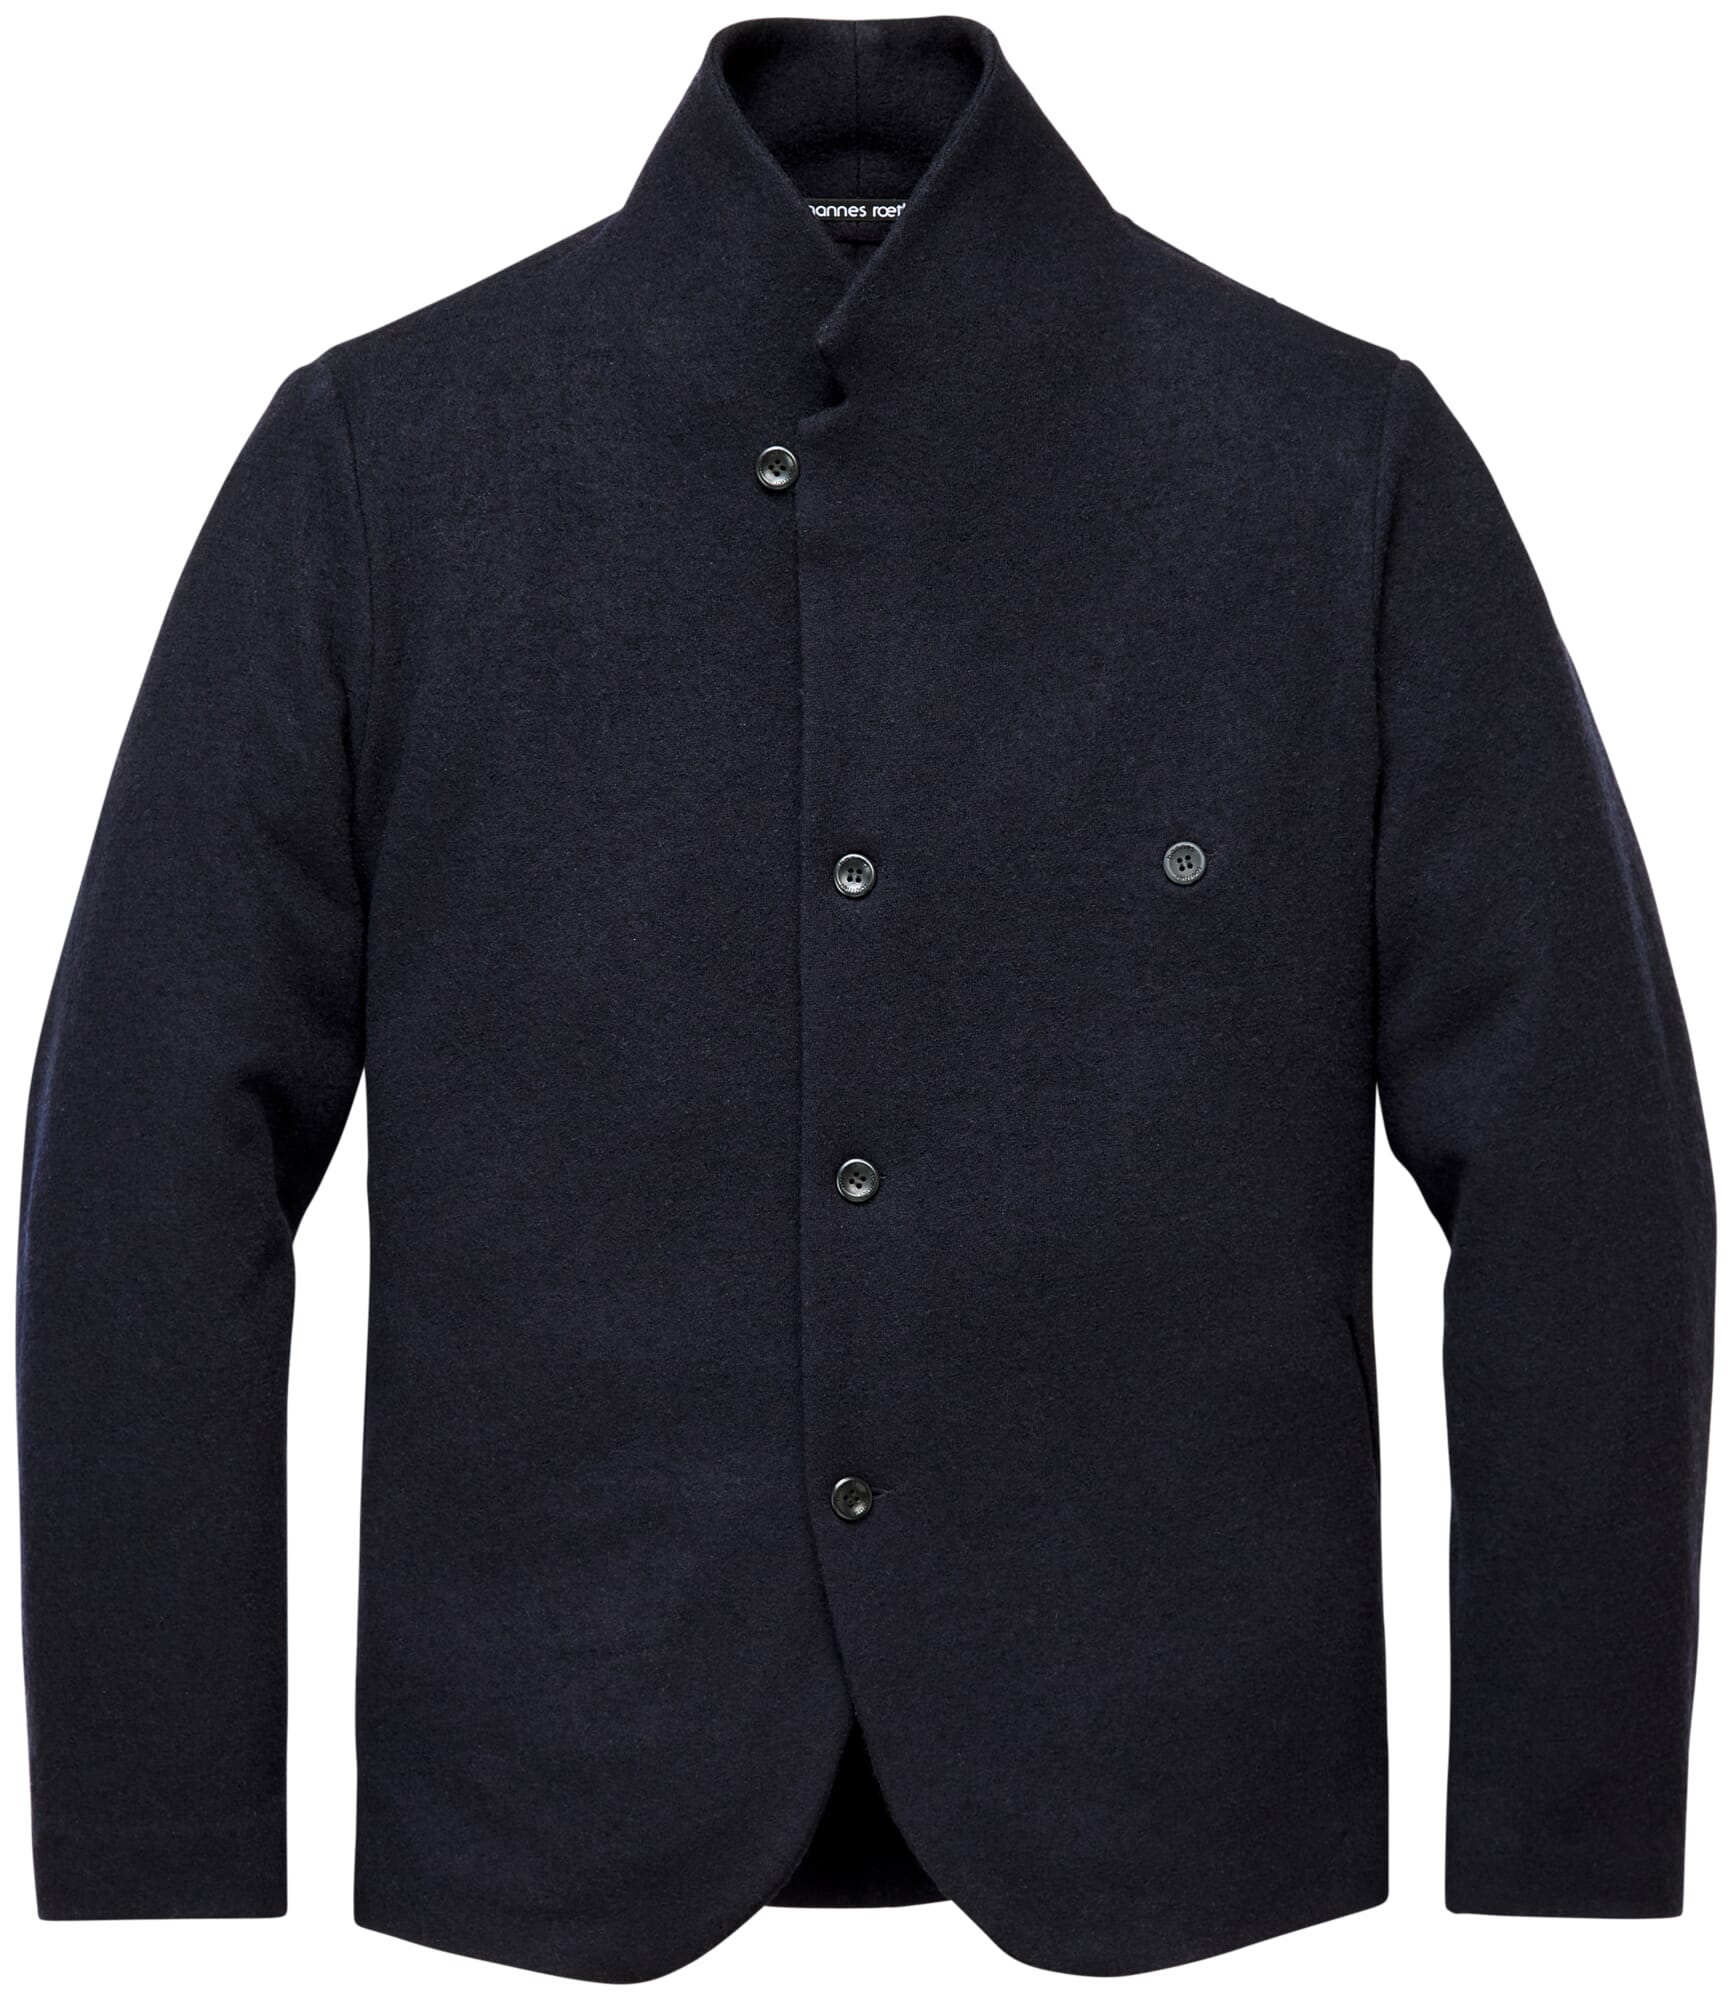 High-Quality Jackets for Men | Manufactum